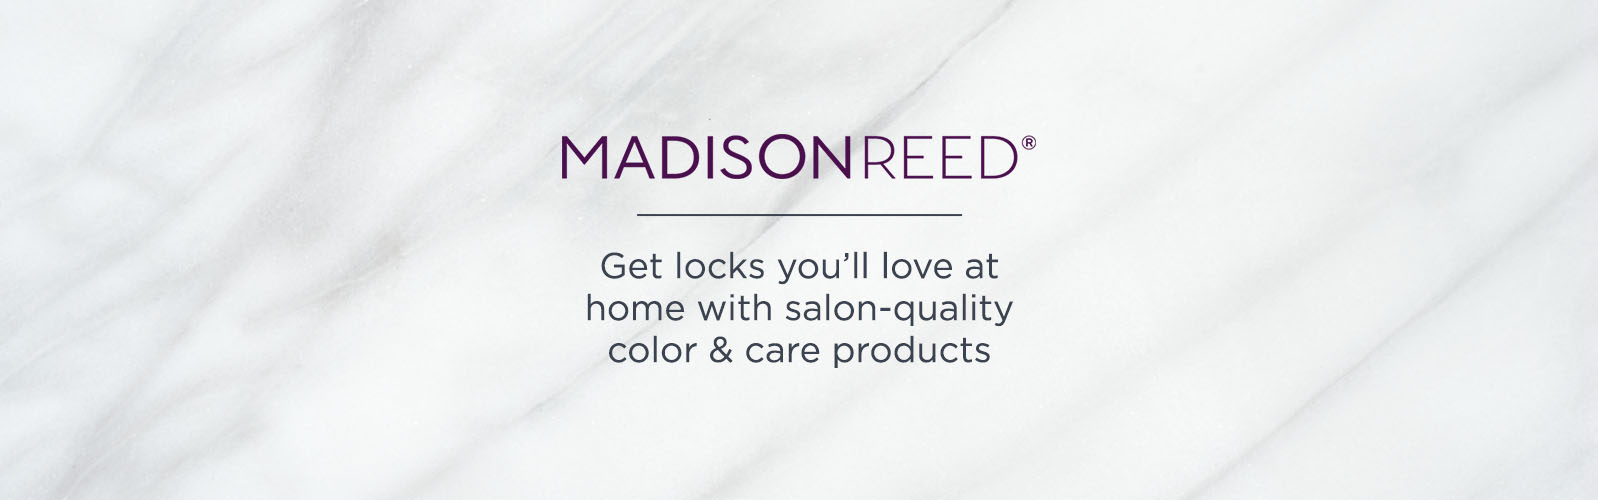 Madison Reed - Get locks you'll love at home with salon-quality color & care products